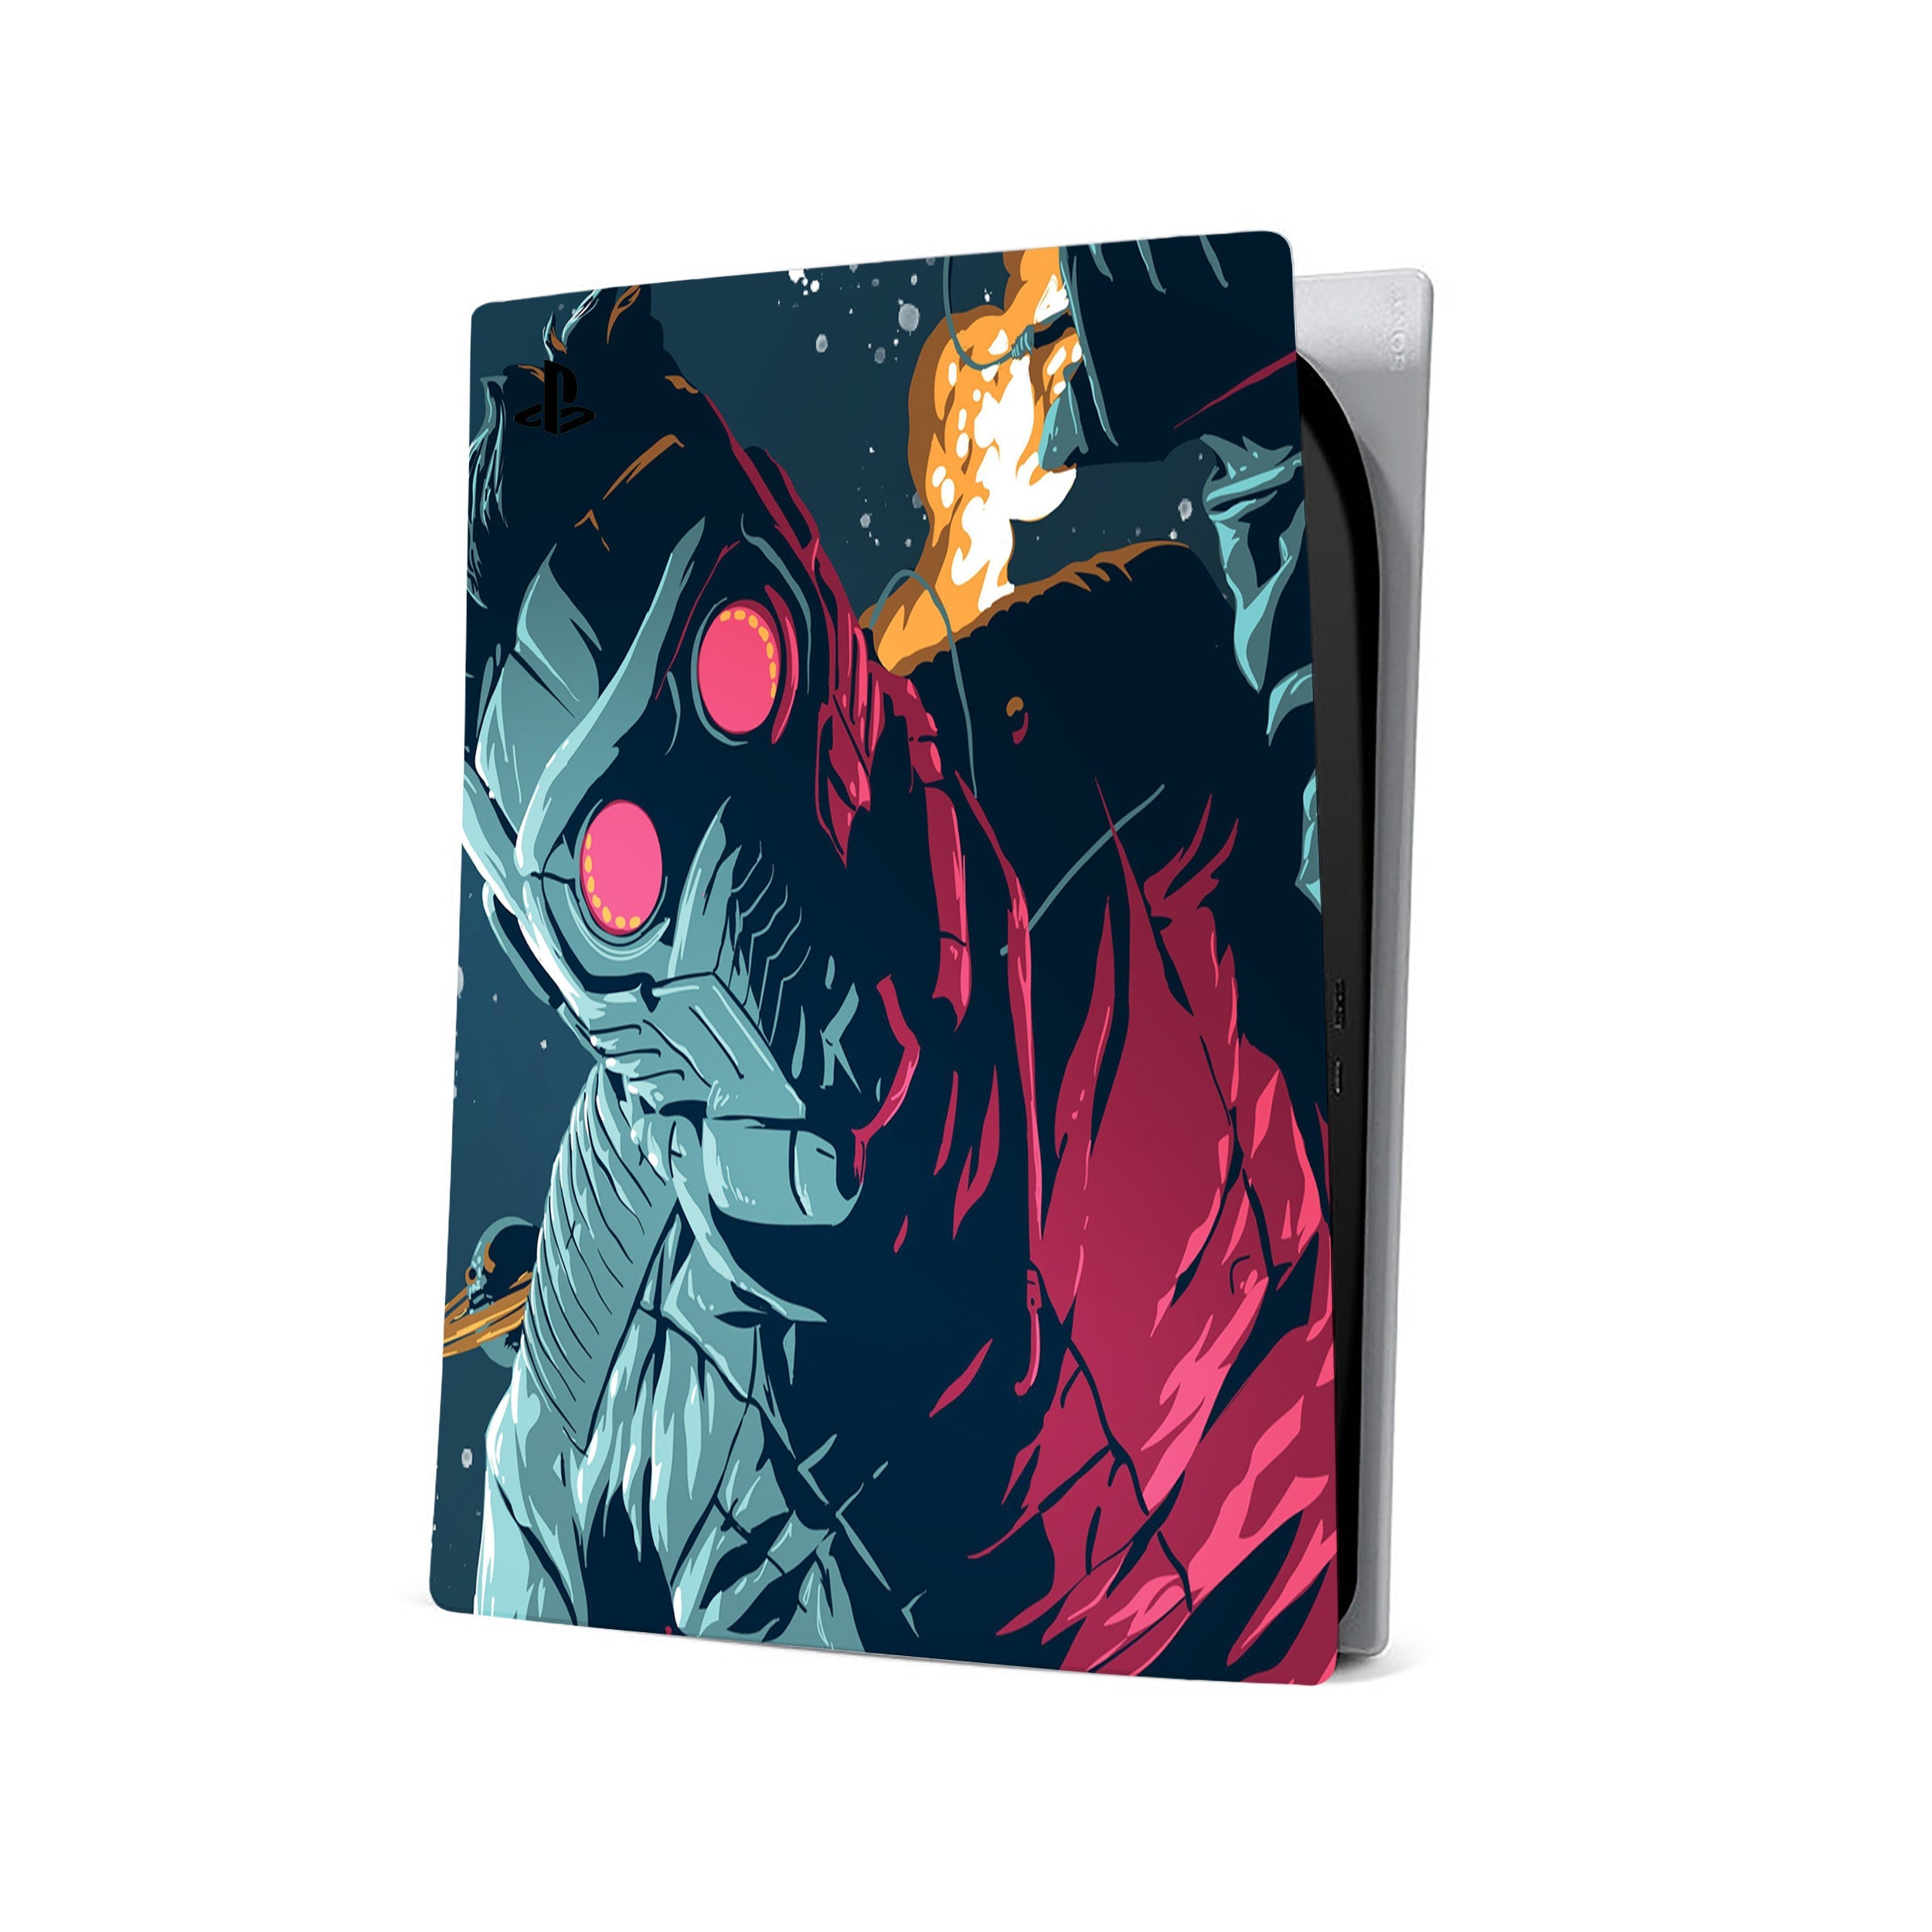 A video game skin featuring a Marvel Guardians of the Galaxy Star Lord design for the PS5.